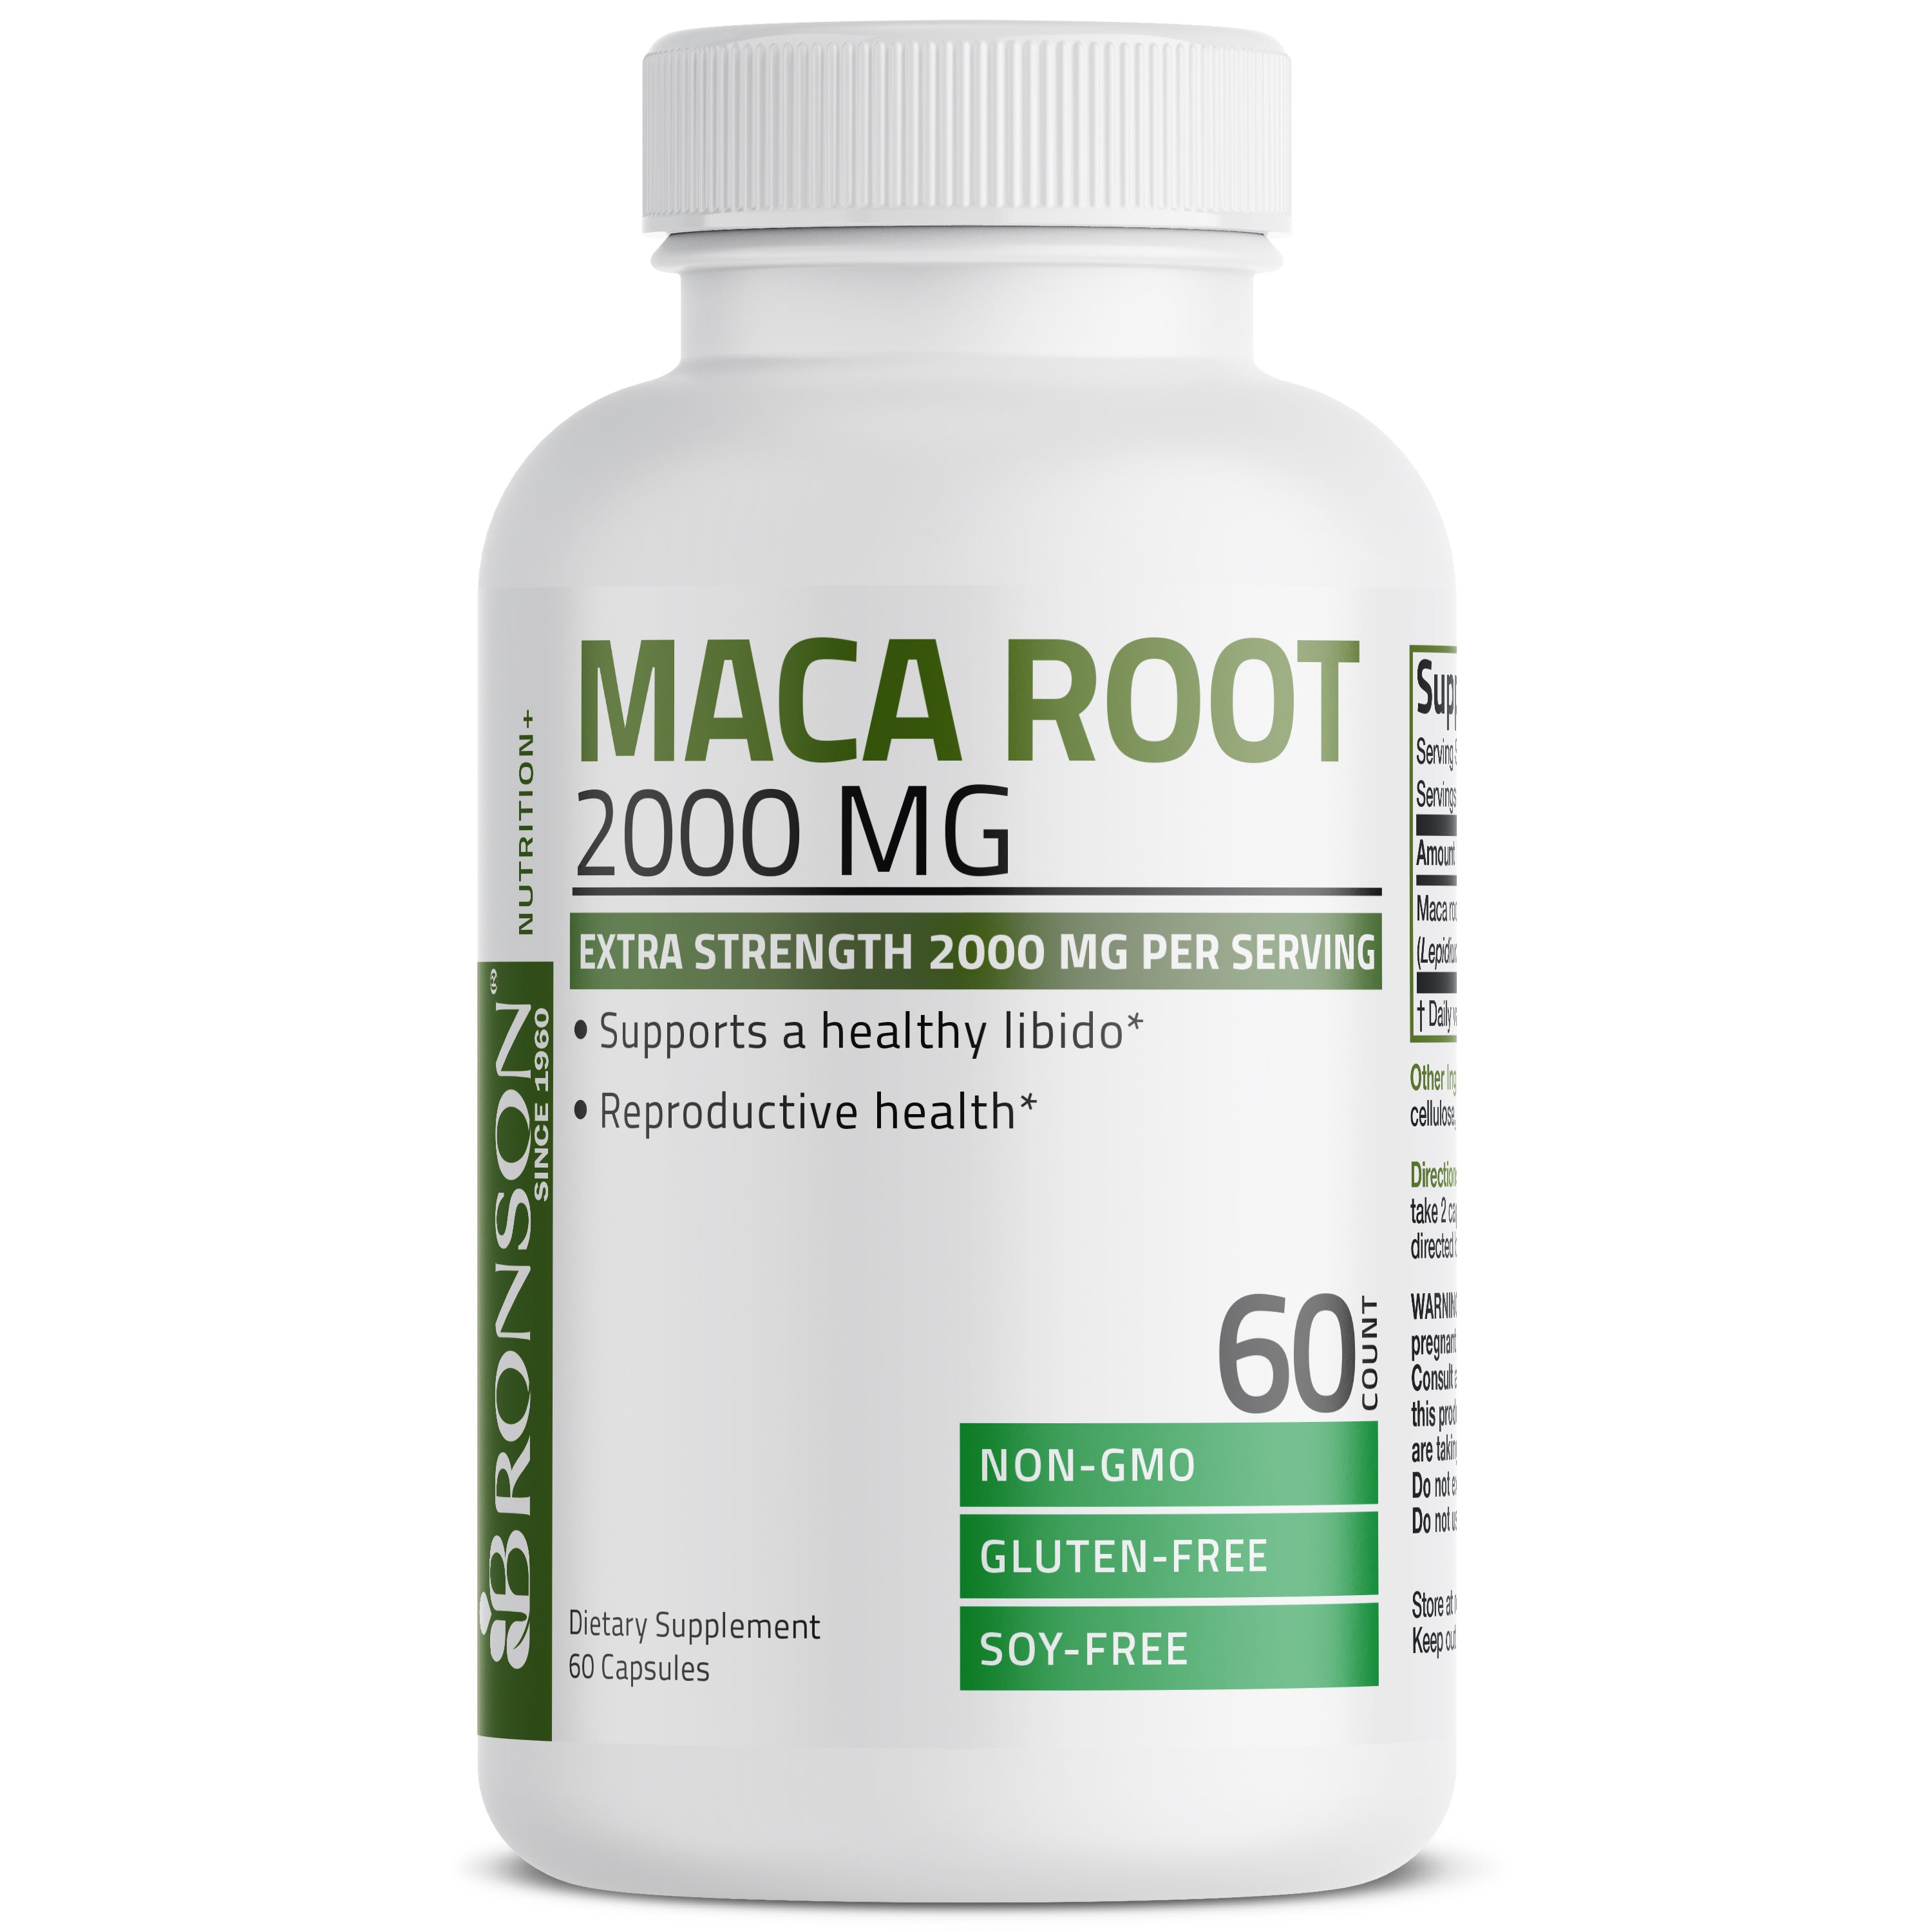 Maca Root Extra Strength - 2,000 mg view 4 of 6